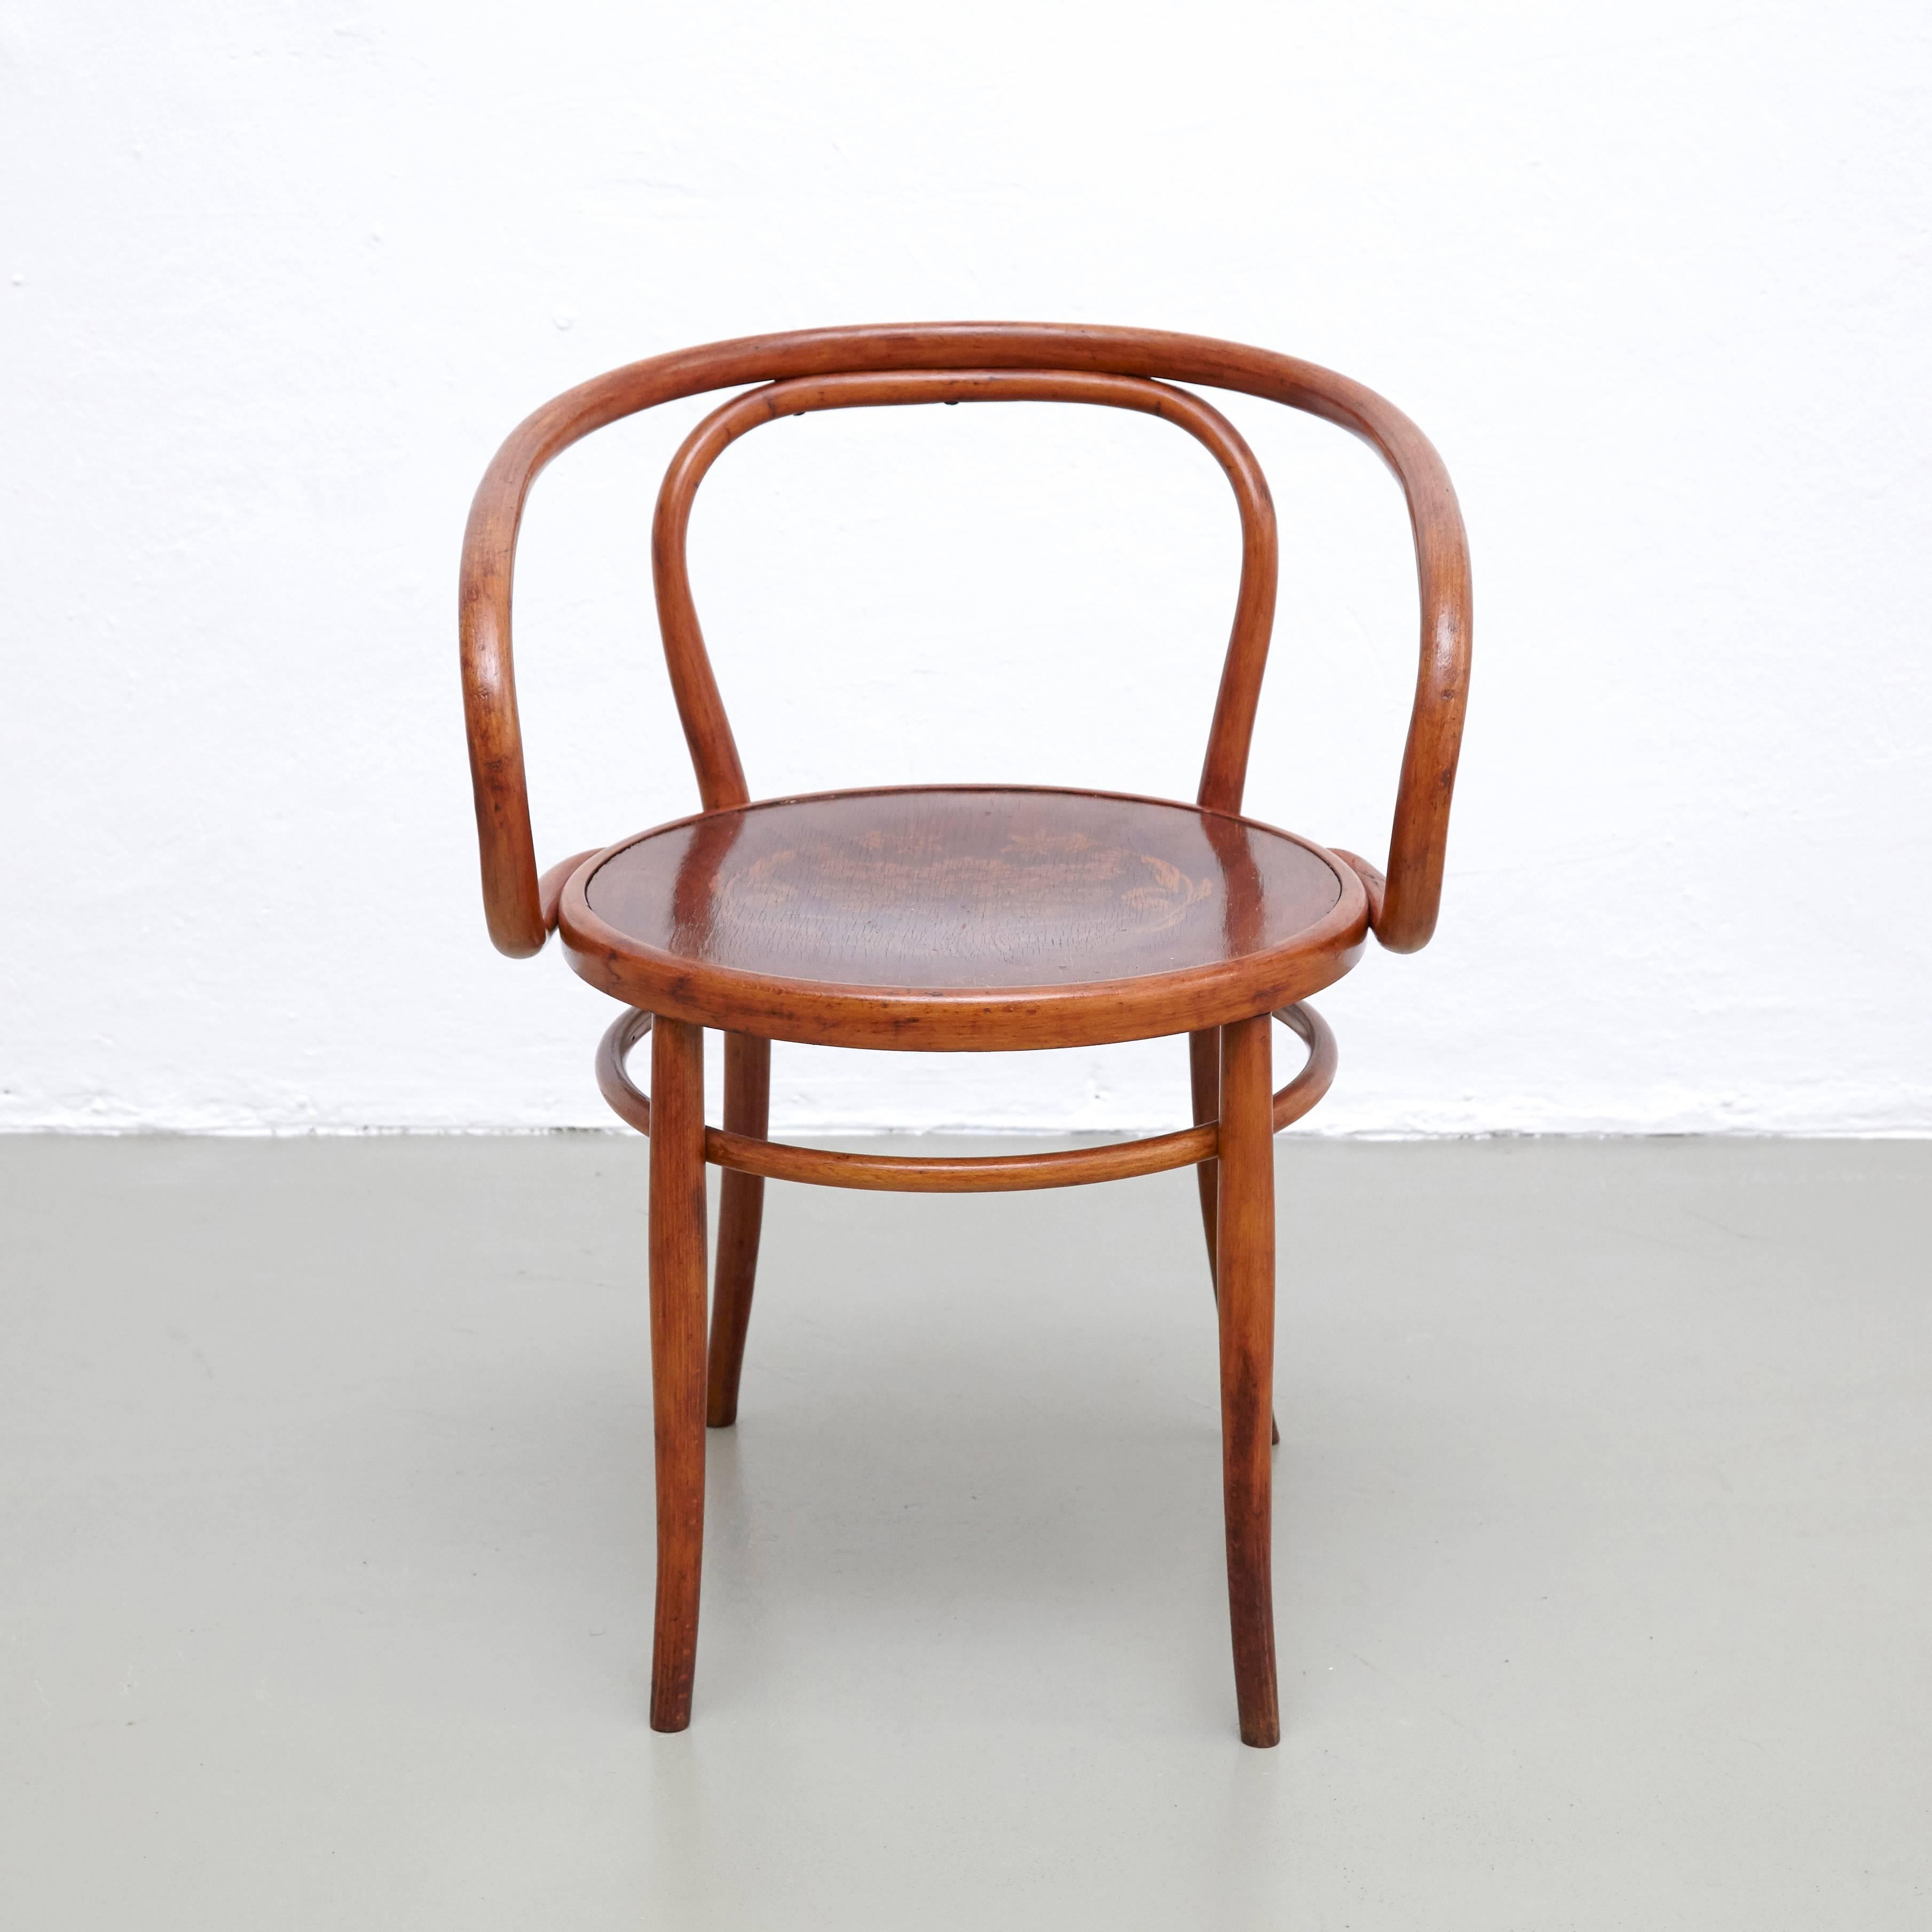 Bentwood Armchair designed by Horgen Glaris, circa 1920.

In original condition, with minor wear consistent with age and use, preserving a beautiful patina.

 